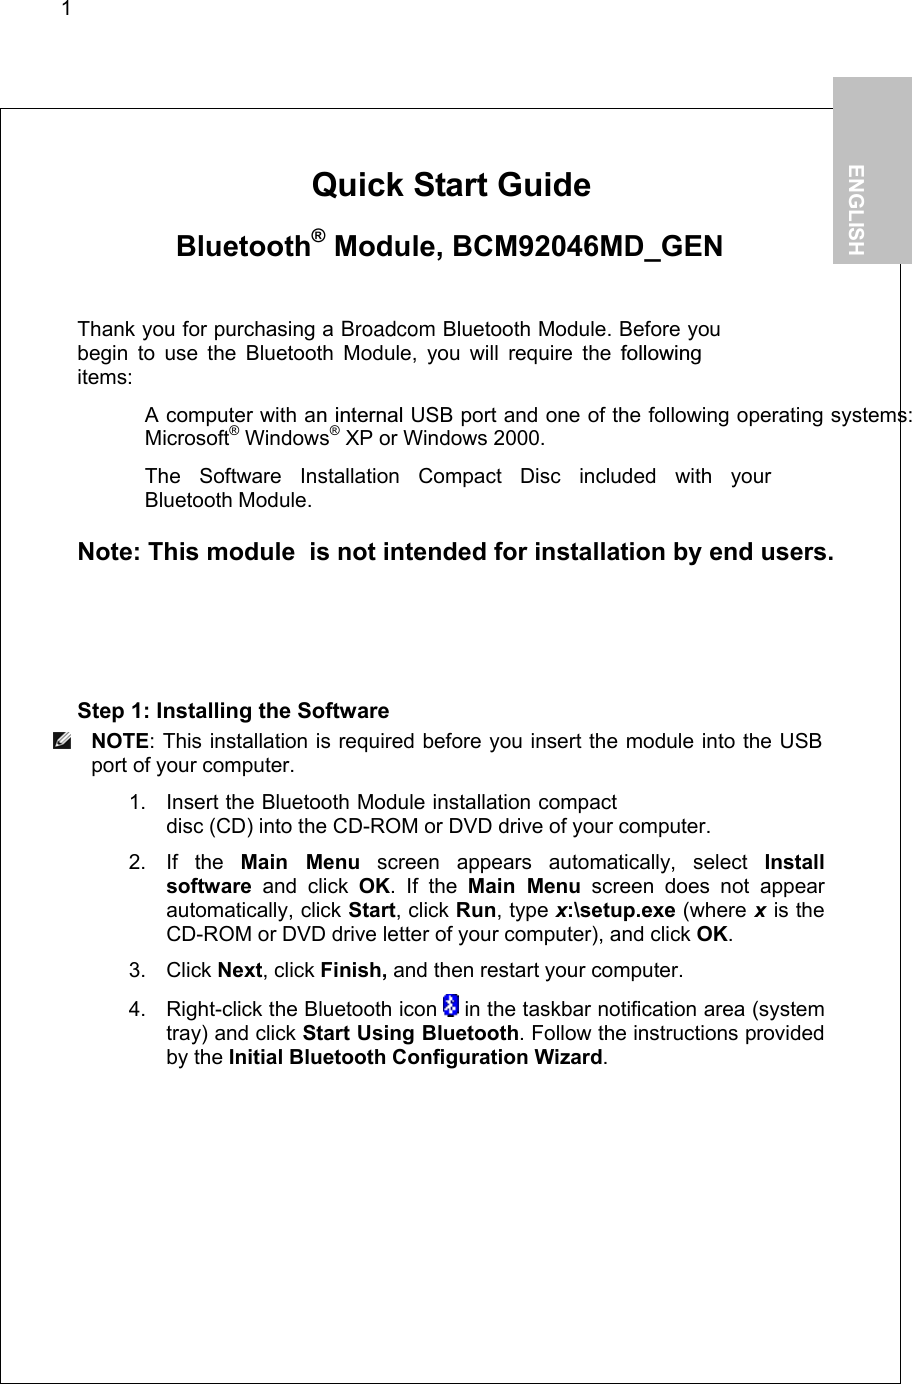 1        Quick Start Guide   Bluetooth® Module, BCM92046MD_GEN  Thank you for purchasing a Broadcom Bluetooth Module. Before you begin to use the Bluetooth Module, you will require the followingitems:   A computer with an internal USB port and one of the following operating systems: Microsoft® Windows® XP or Windows 2000.   The Software Installation Compact Disc included with your  Bluetooth Module.  Note: This module  is not intended for installation by end users.  Step 1: Installing the Software  NOTE: This installation is required before you insert the module into the USB port of your computer. 1. Insert the Bluetooth Module installation compact disc (CD) into the CD-ROM or DVD drive of your computer. 2. If the Main Menu screen appears automatically, select Install software and click OK. If the Main Menu screen does not appear automatically, click Start, click Run, type x:\setup.exe (where x is the CD-ROM or DVD drive letter of your computer), and click OK. 3. Click Next, click Finish, and then restart your computer. 4.  Right-click the Bluetooth icon   in the taskbar notification area (system tray) and click Start Using Bluetooth. Follow the instructions provided by the Initial Bluetooth Configuration Wizard.   1.           ENGLISH  